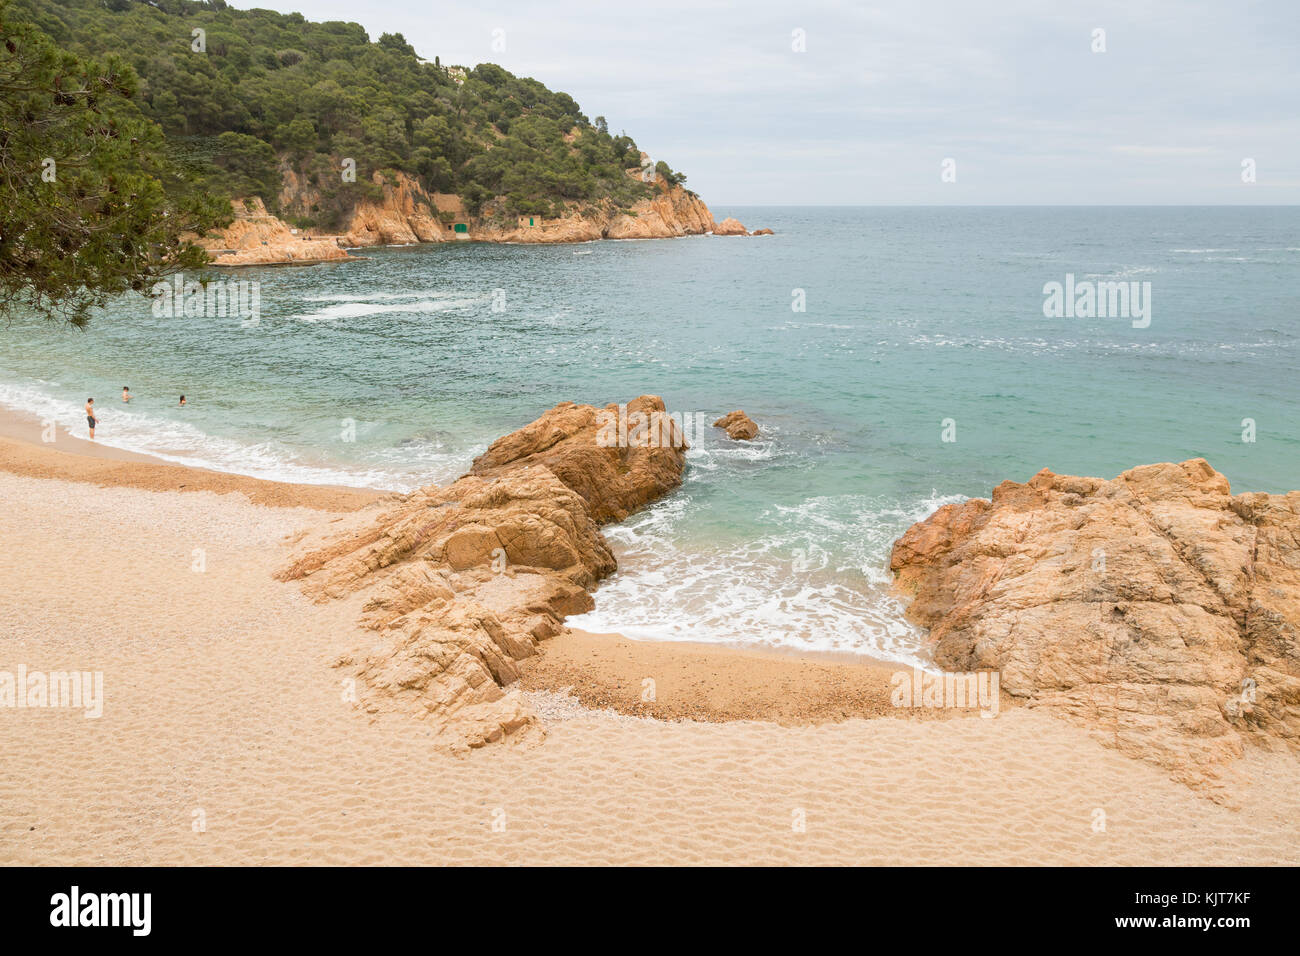 The bay and beach of Tamariu, Spain, with three swimmers Stock Photo